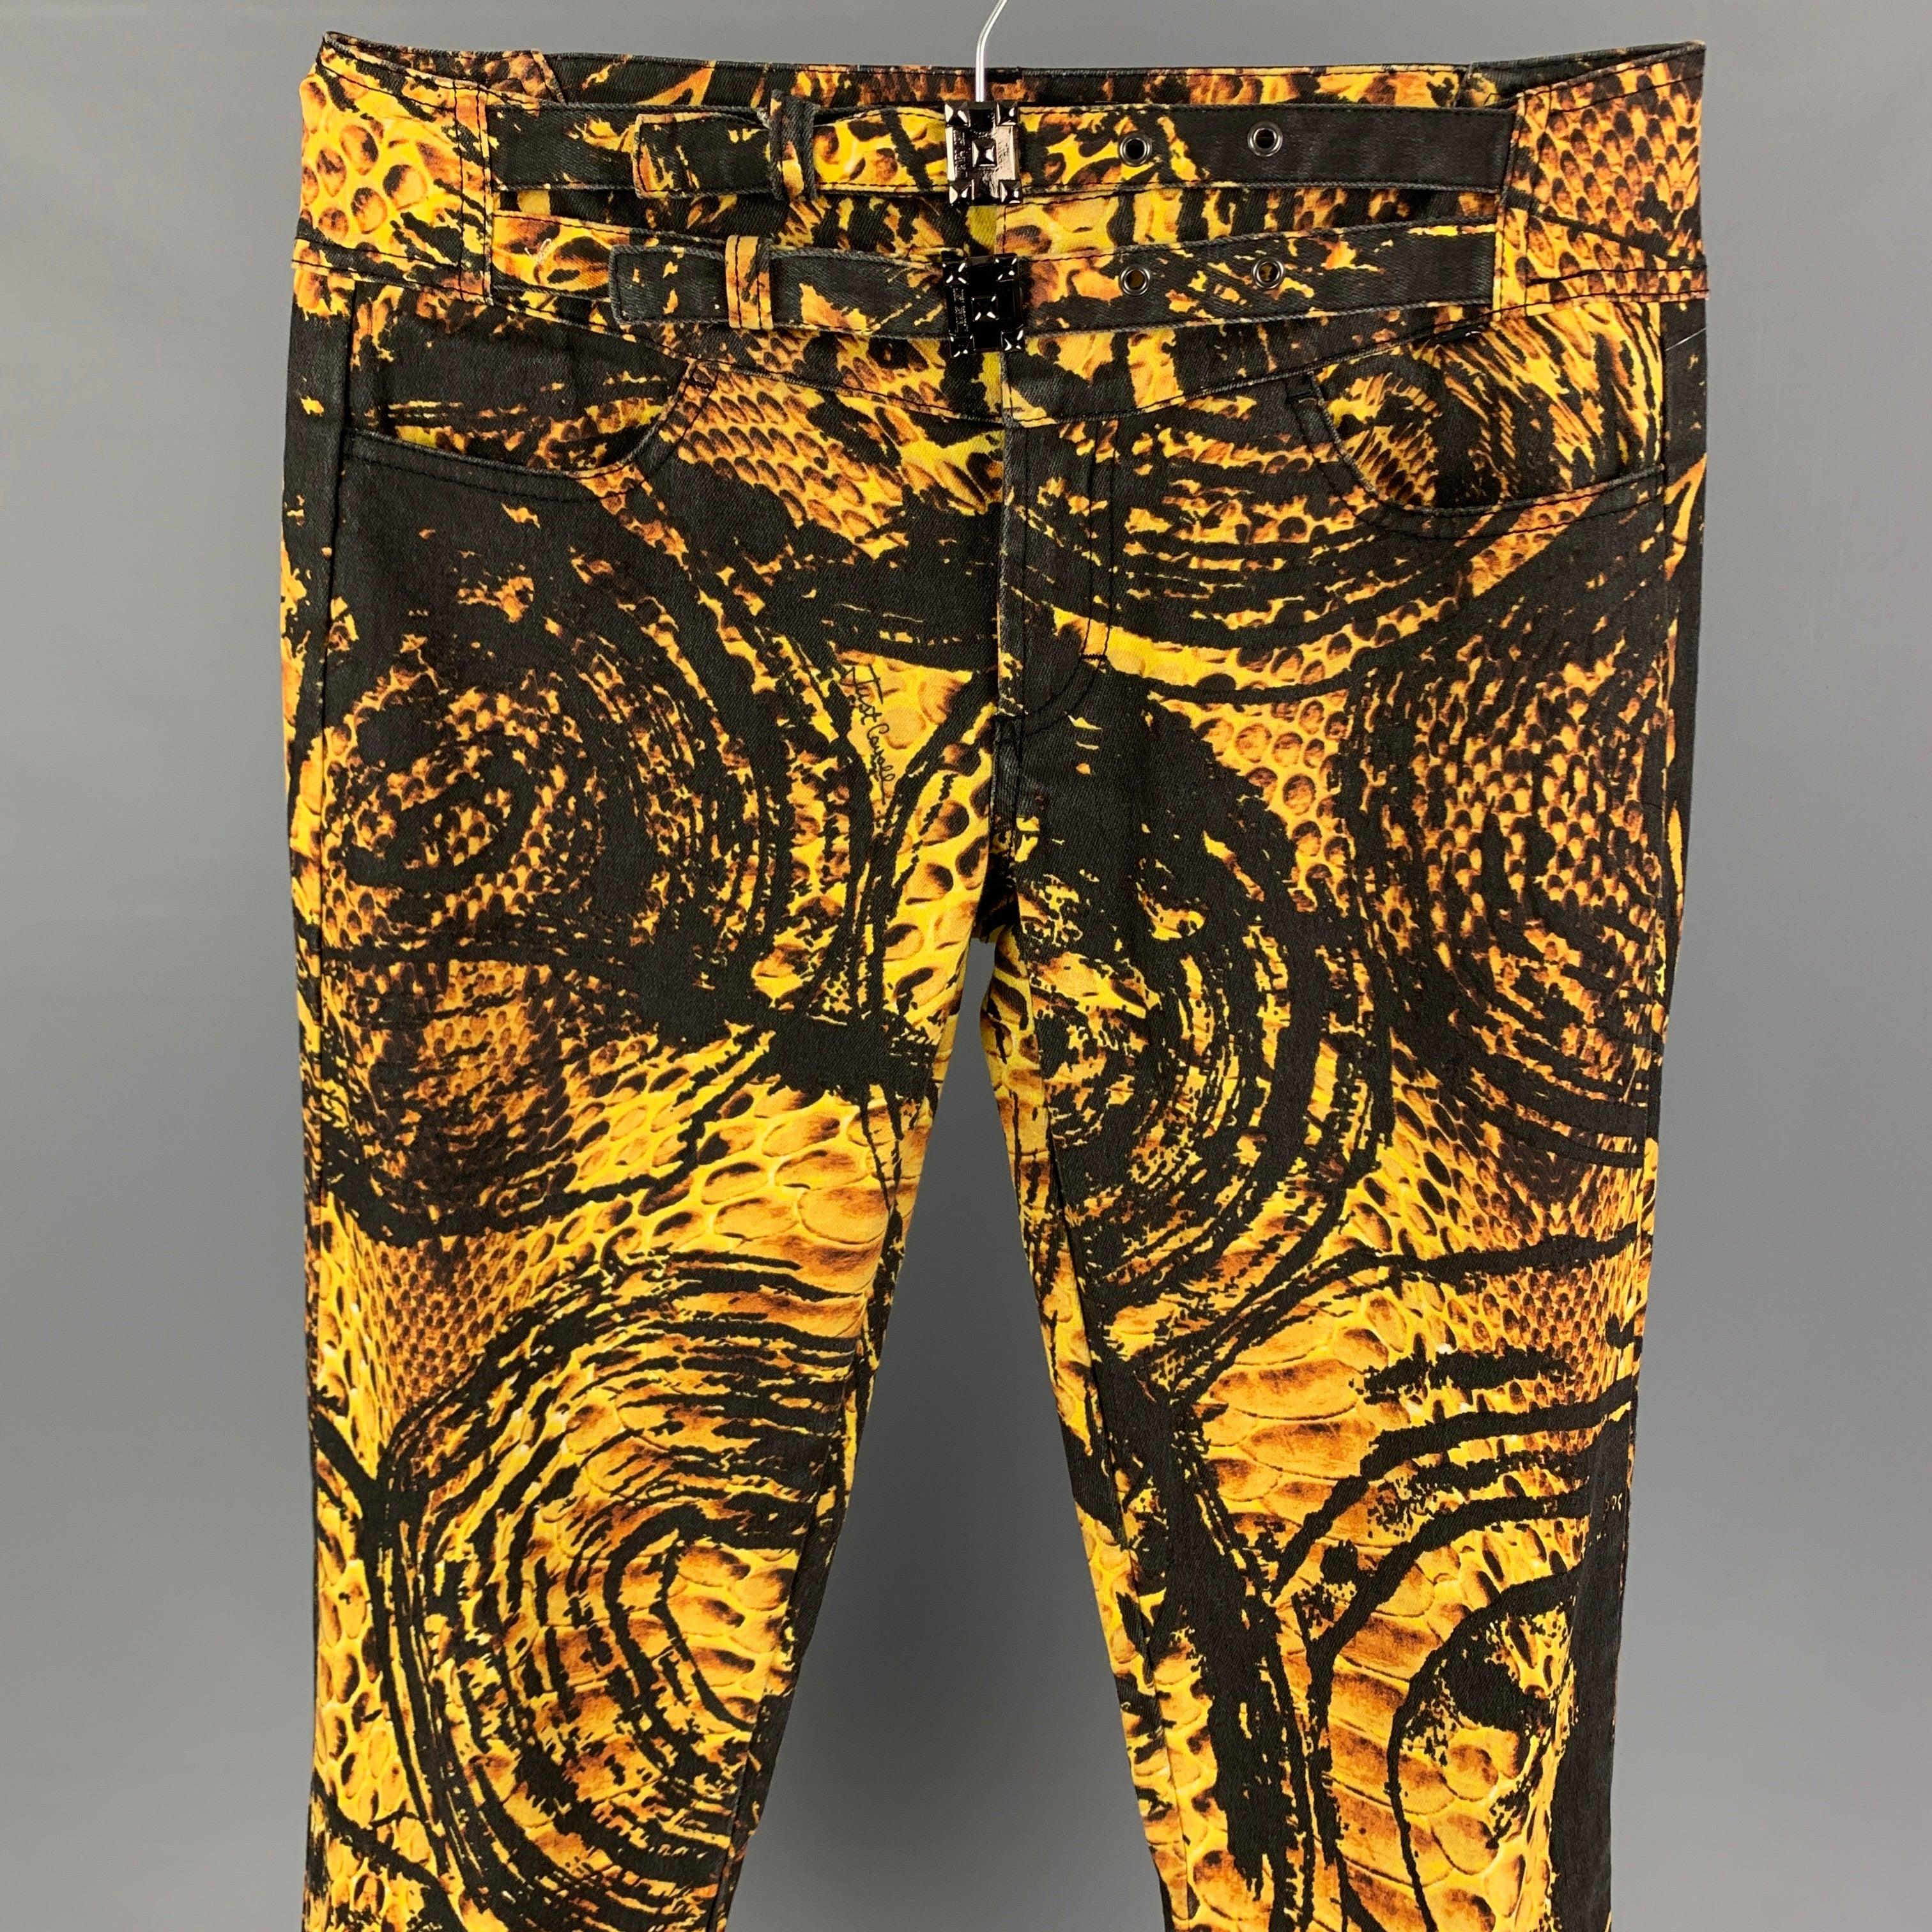 JUST CAVALLI pants comes in a yellow & black graphic print cotton featuring a skinny fit, double belt detail, front tabs, and a zip fly closure. Made in Italy.
Very Good
Pre-Owned Condition. 

Marked:   29 43 

Measurements: 
  Waist: 32 inches